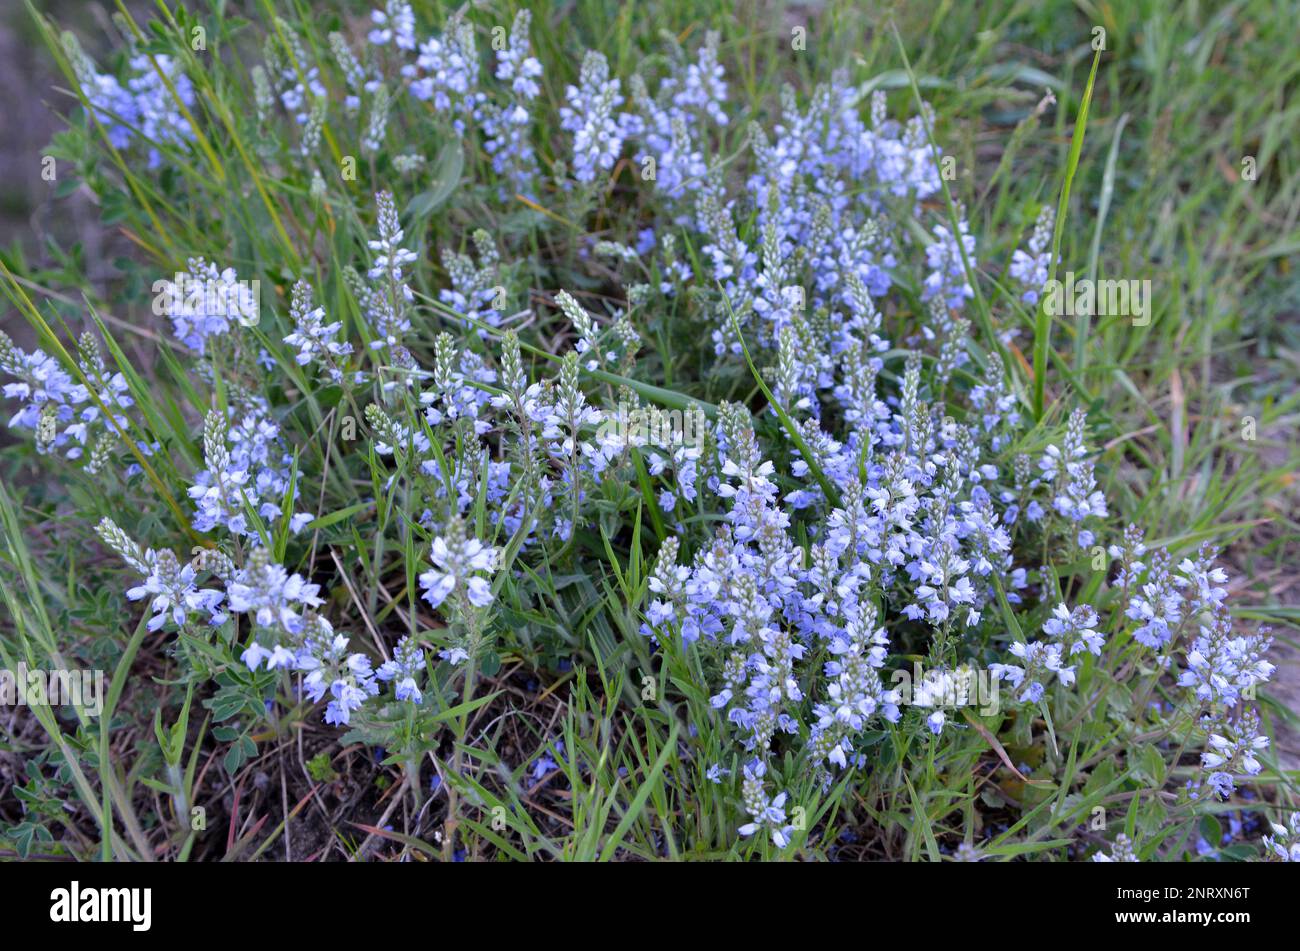 In the spring, Veronica prostrata blooms in the wild among grasses Stock Photo